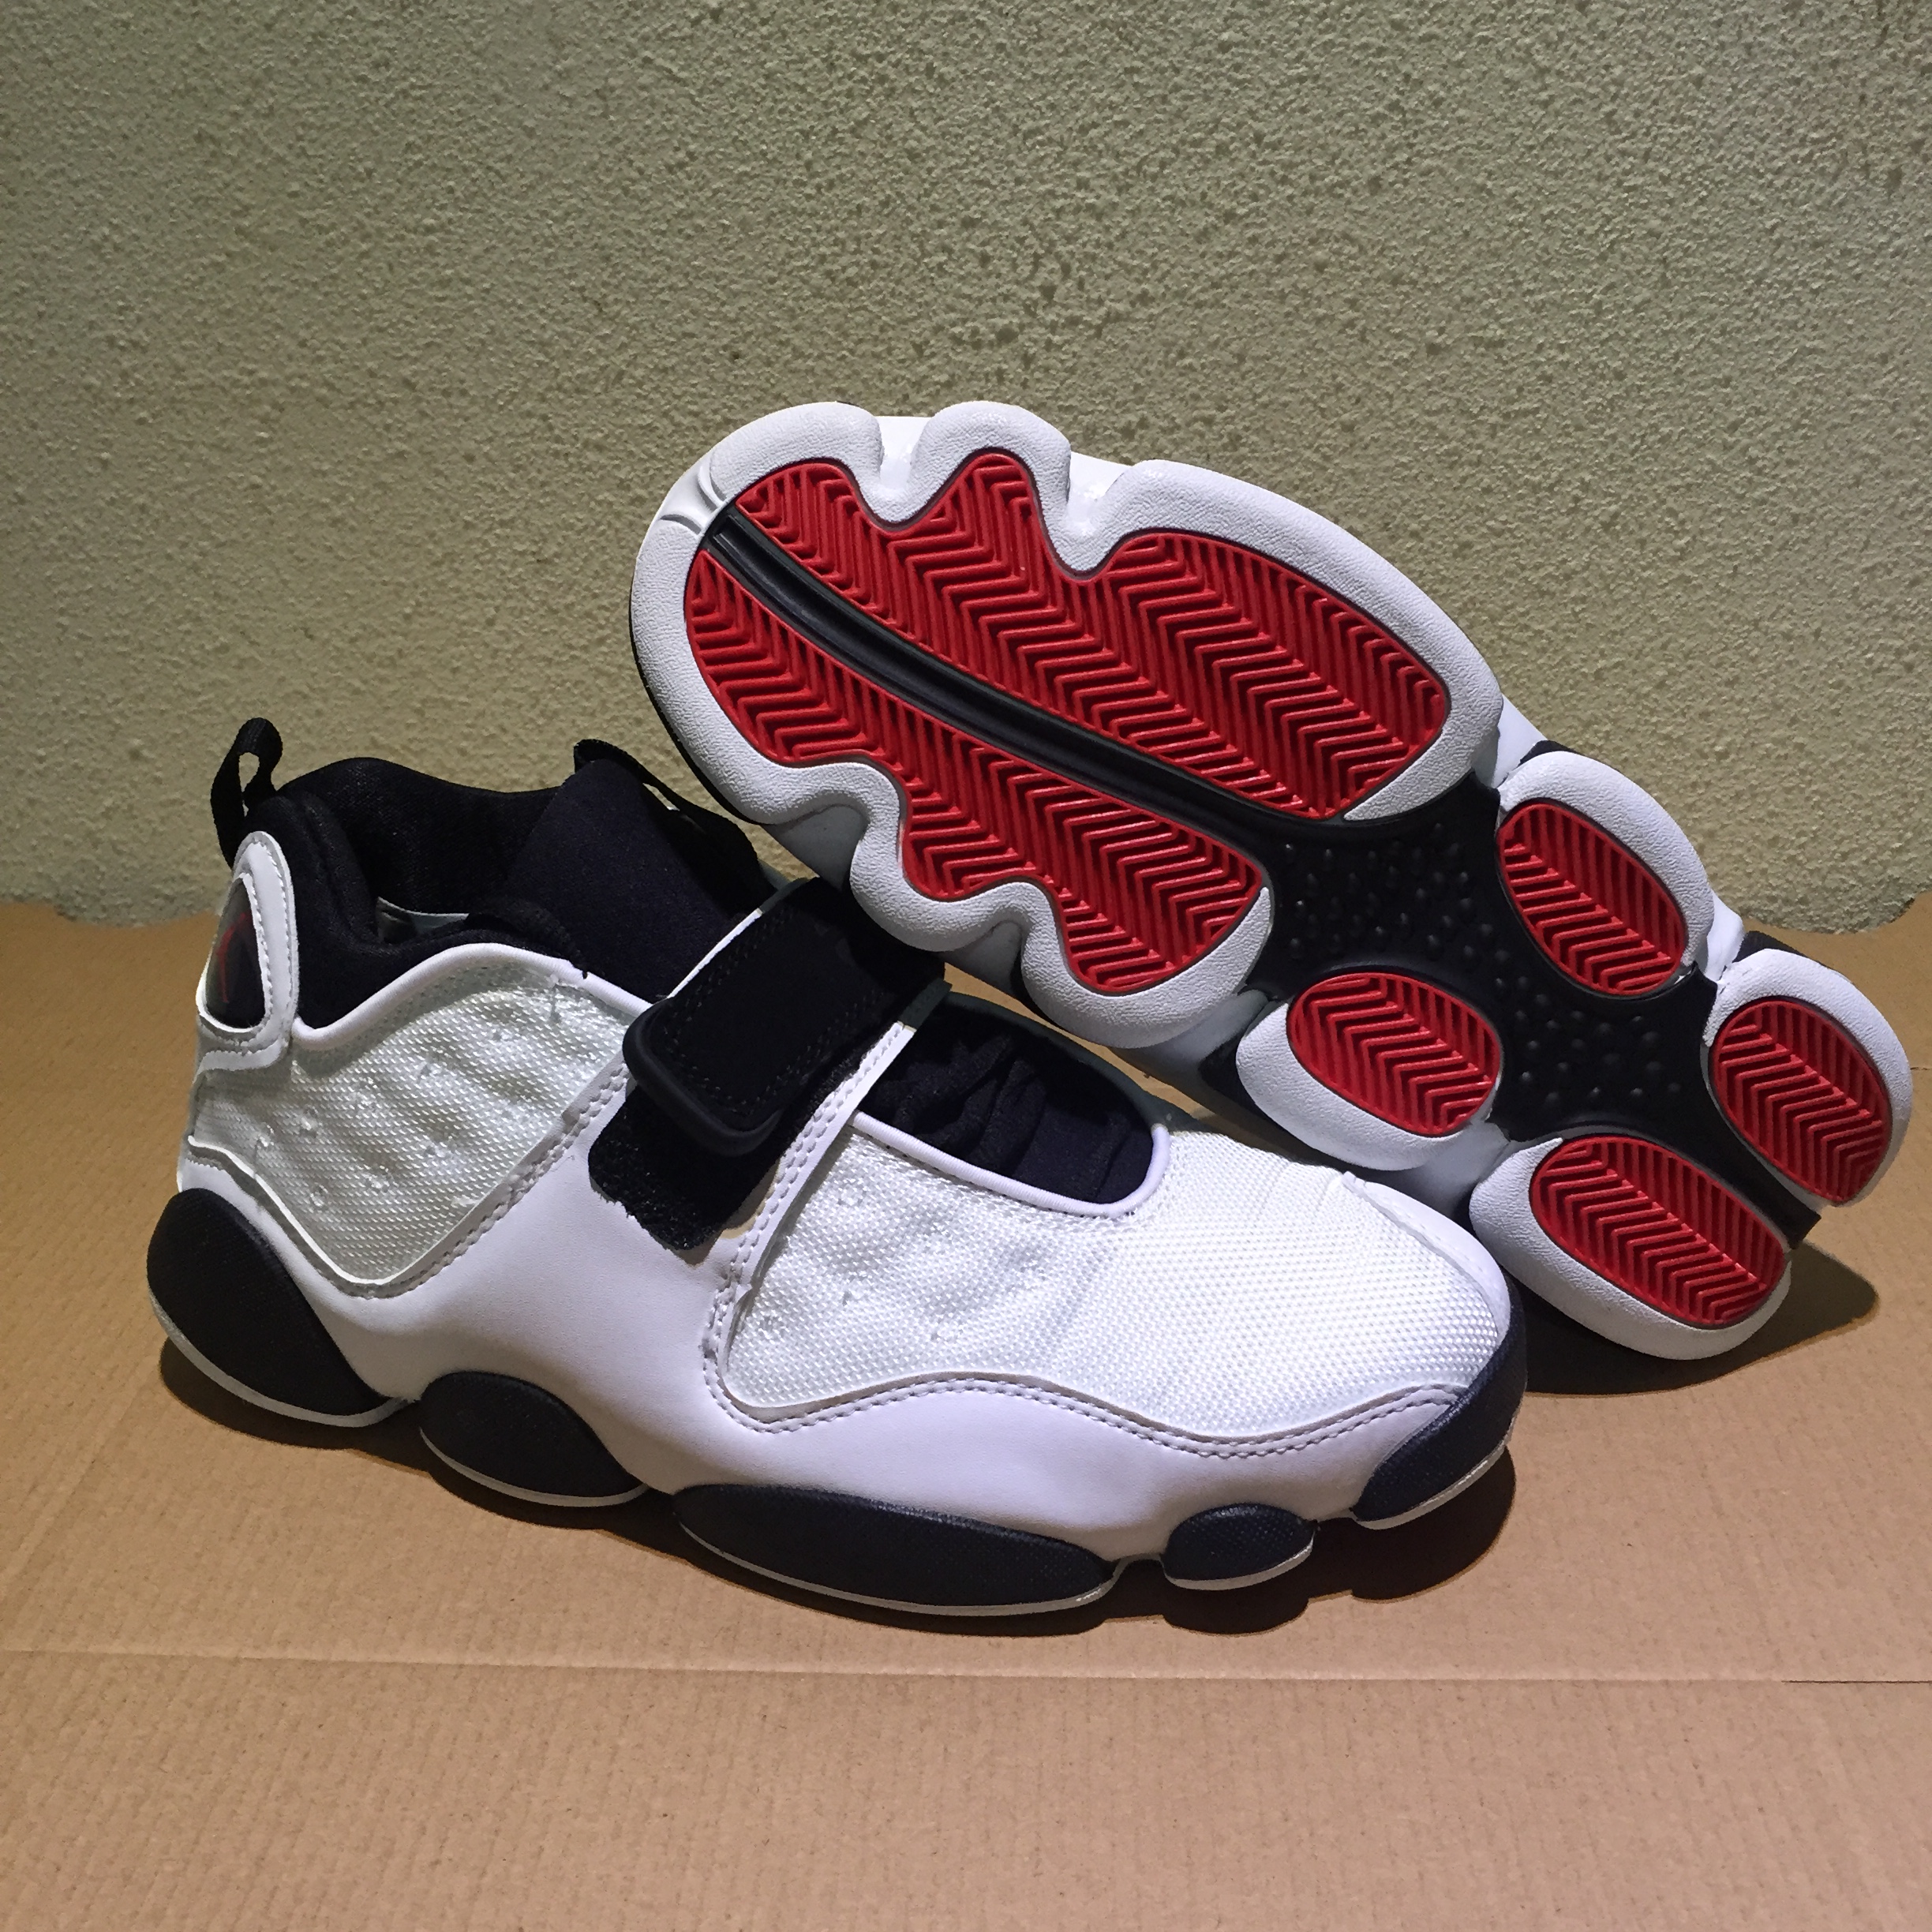 Air Jordan 13 Hand Engage White Black Red Shoes - Click Image to Close